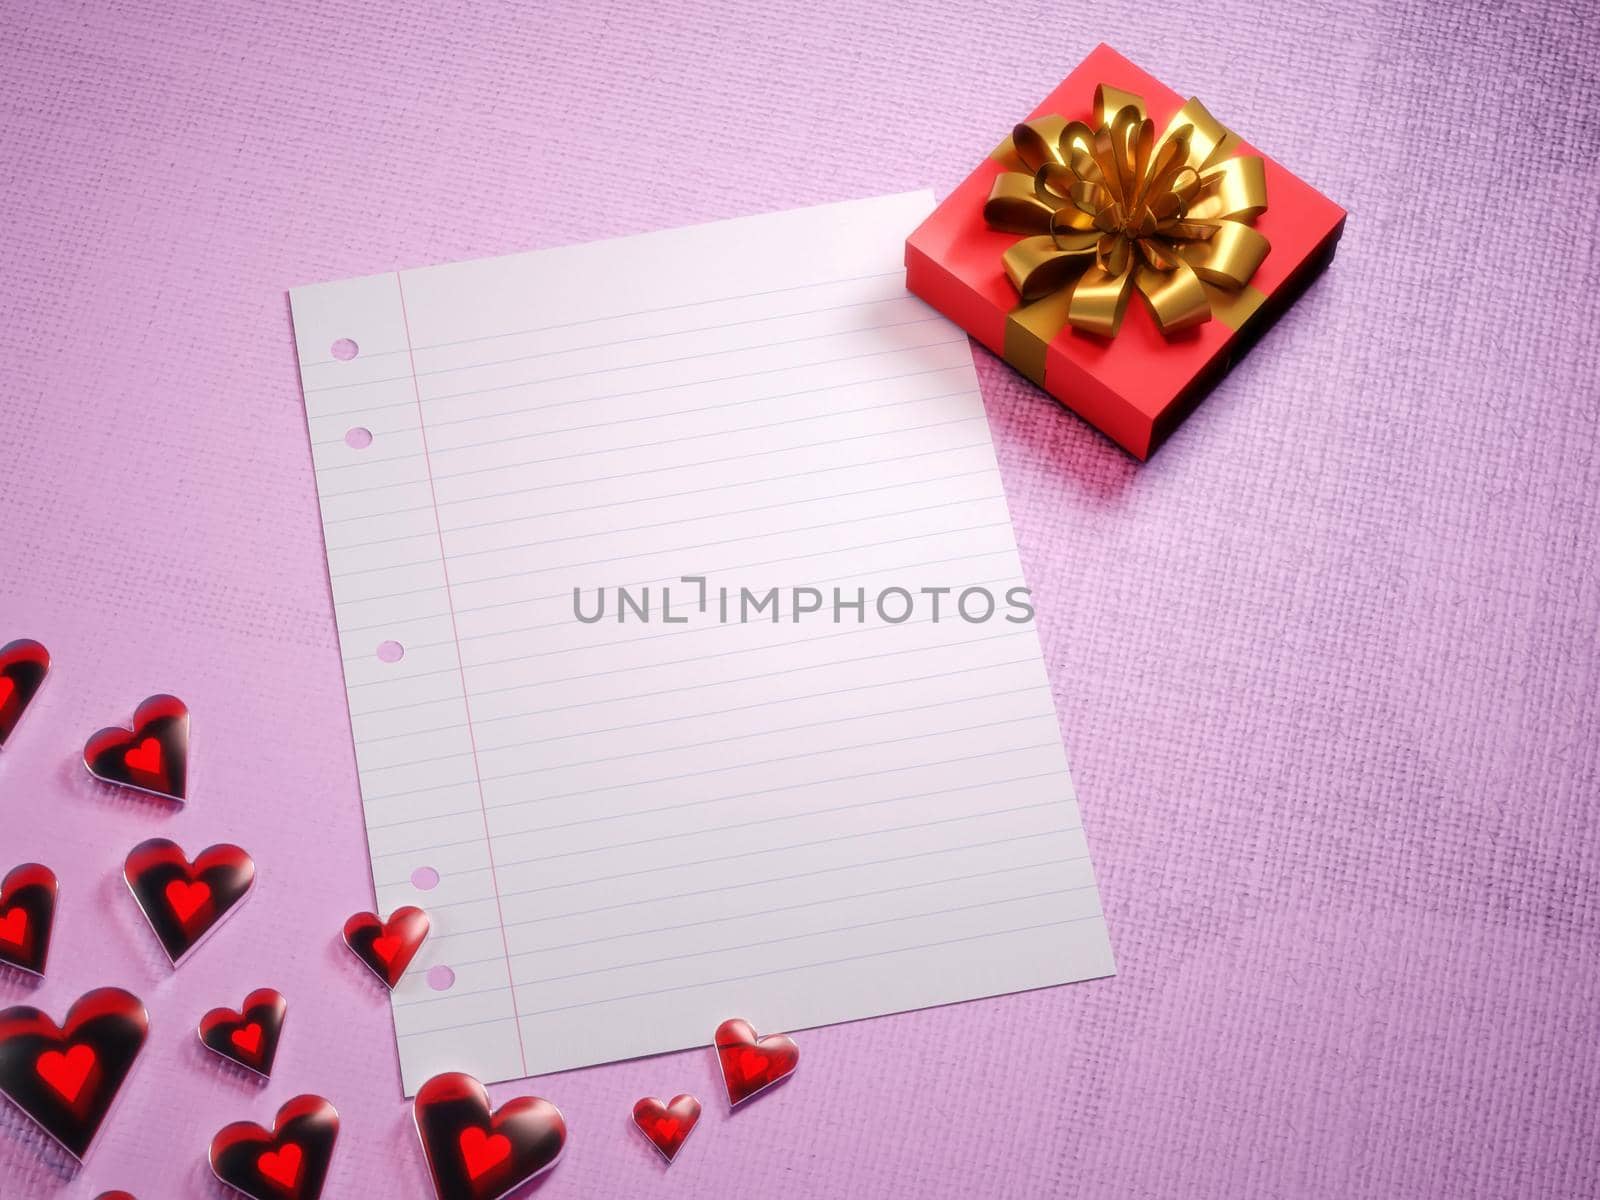 Valentine's day gift, love letter template background. Shiny red hearts, fancy gift box and an blank paper sheet. Digital render.